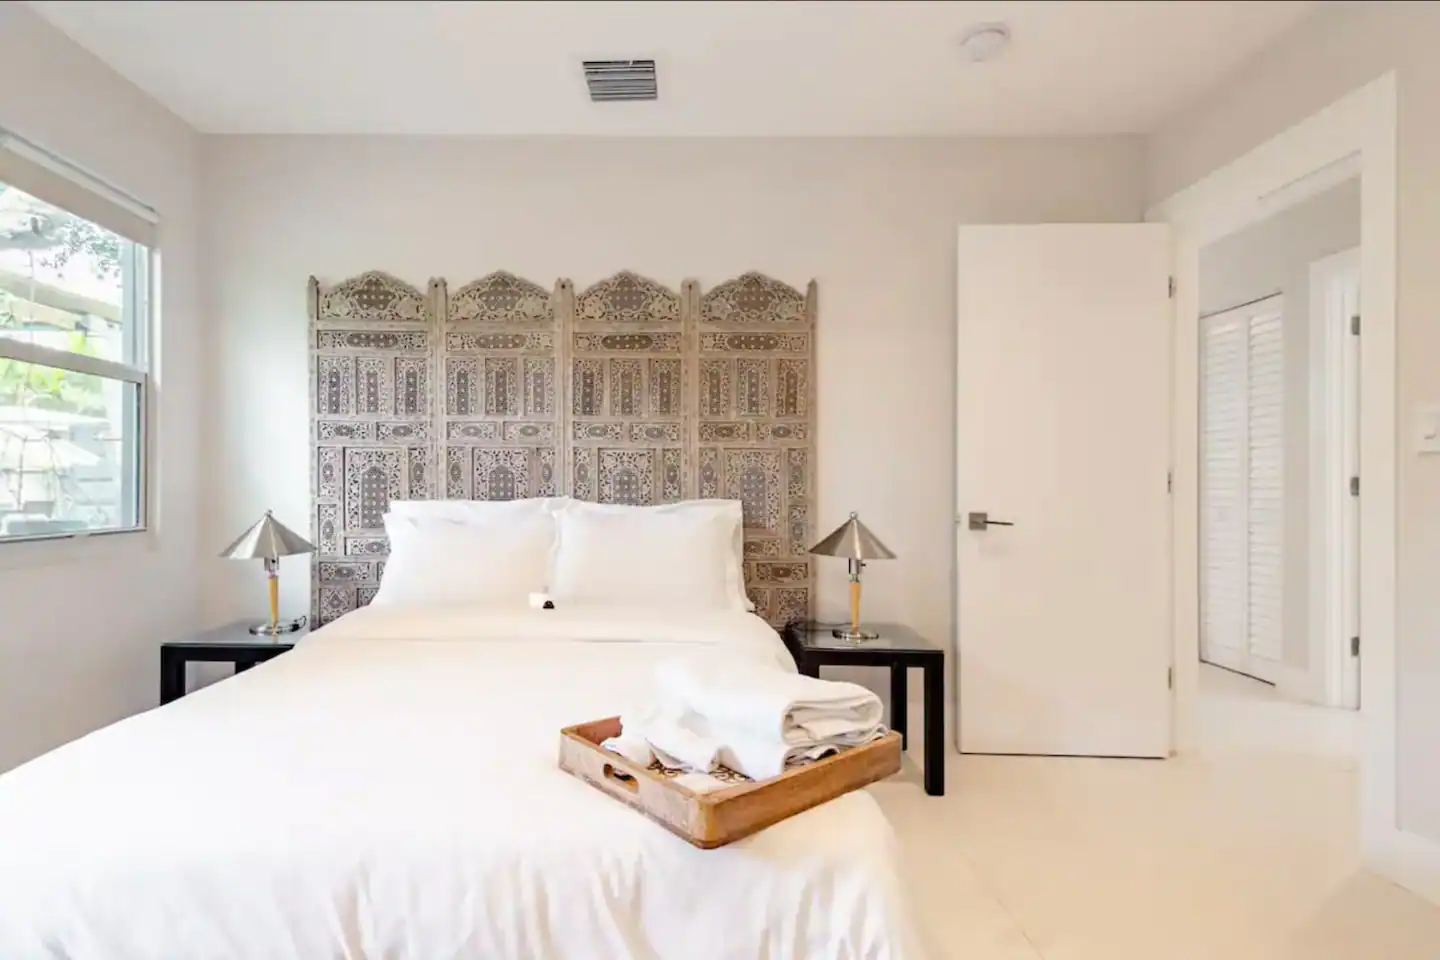 Our Bali Room is the second ensuite bedroom.